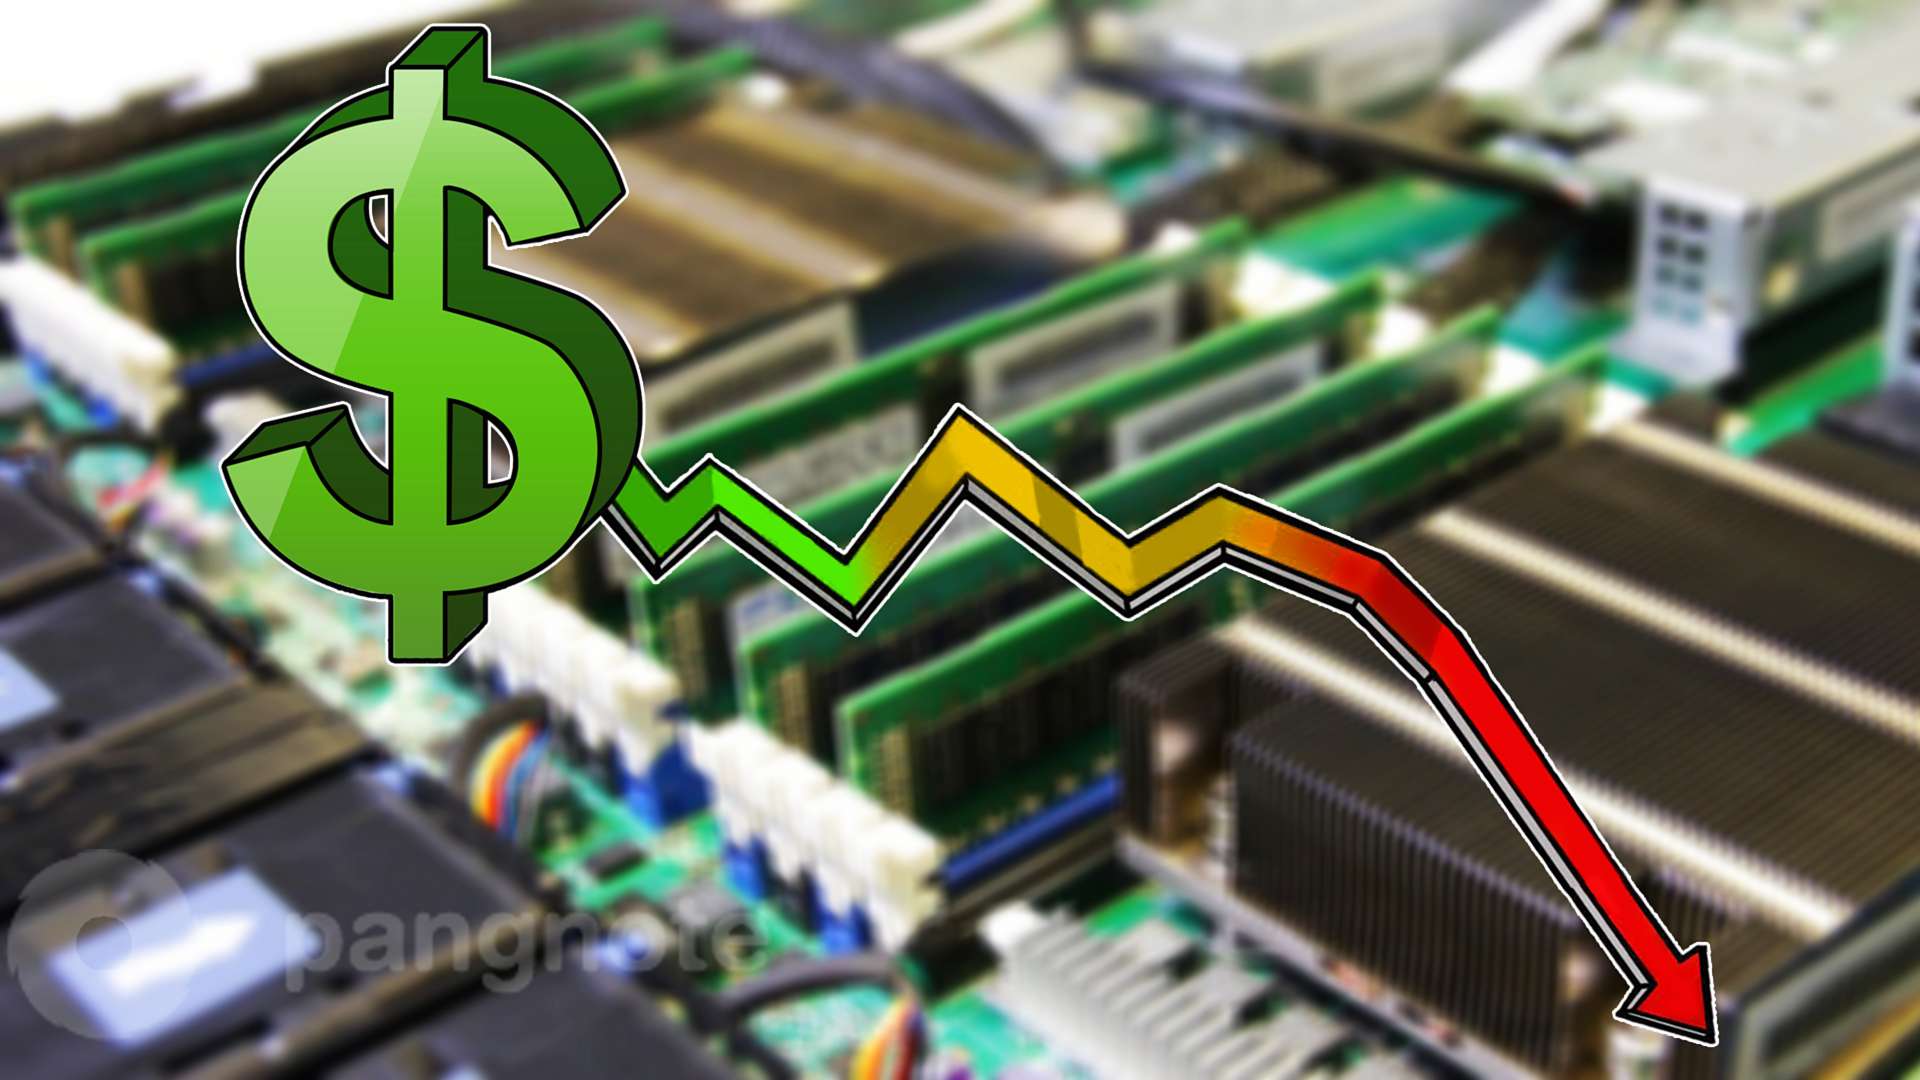 The RAM for the data centers will become cheaper